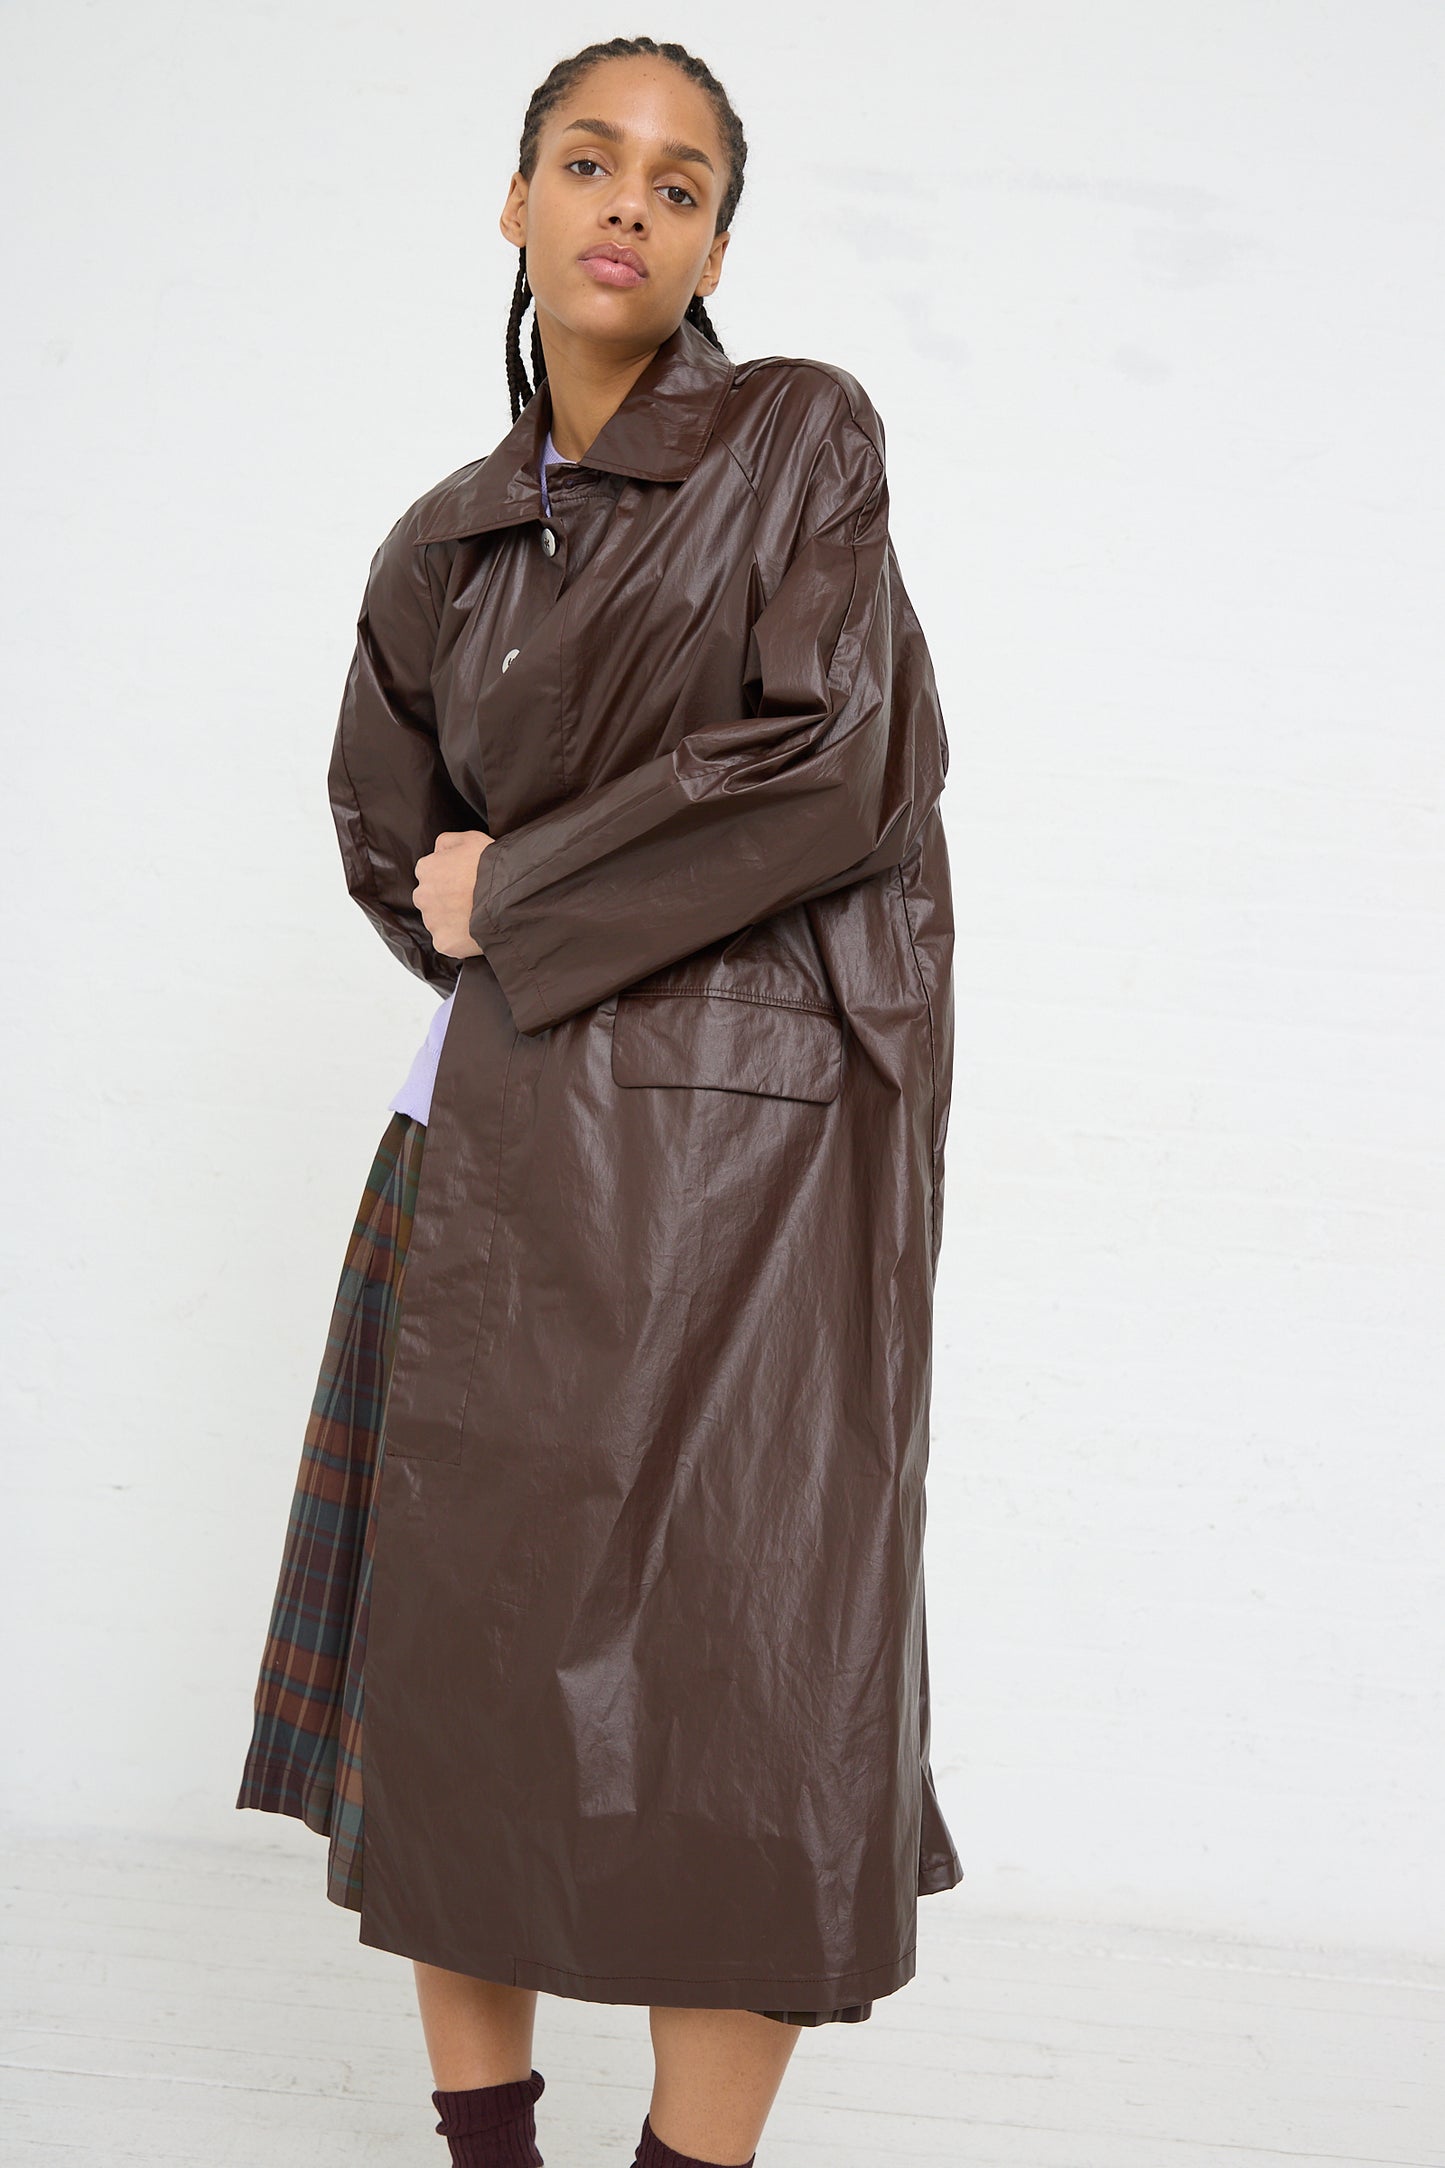 Woman modeling a water repellent long brown Cordera trench coat made in Spain.